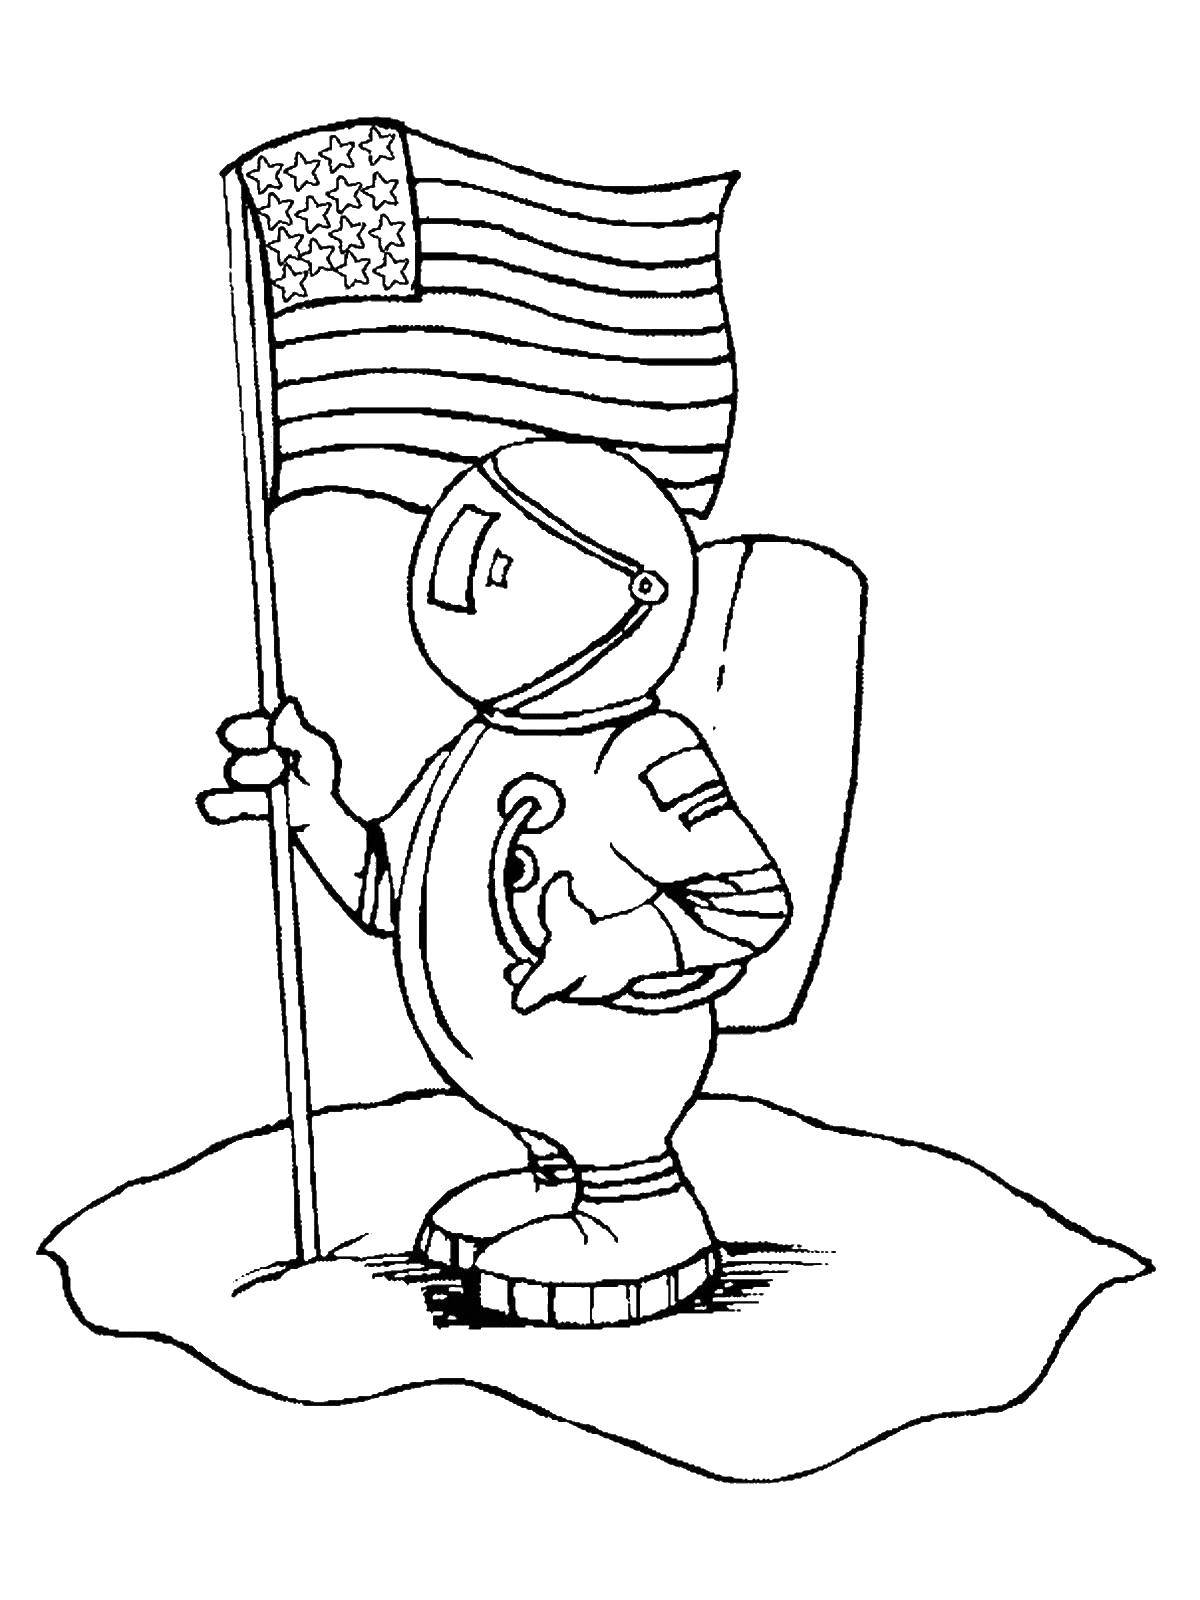 Coloring An astronaut on the moon with flag. Category a profession. Tags:  Profession.